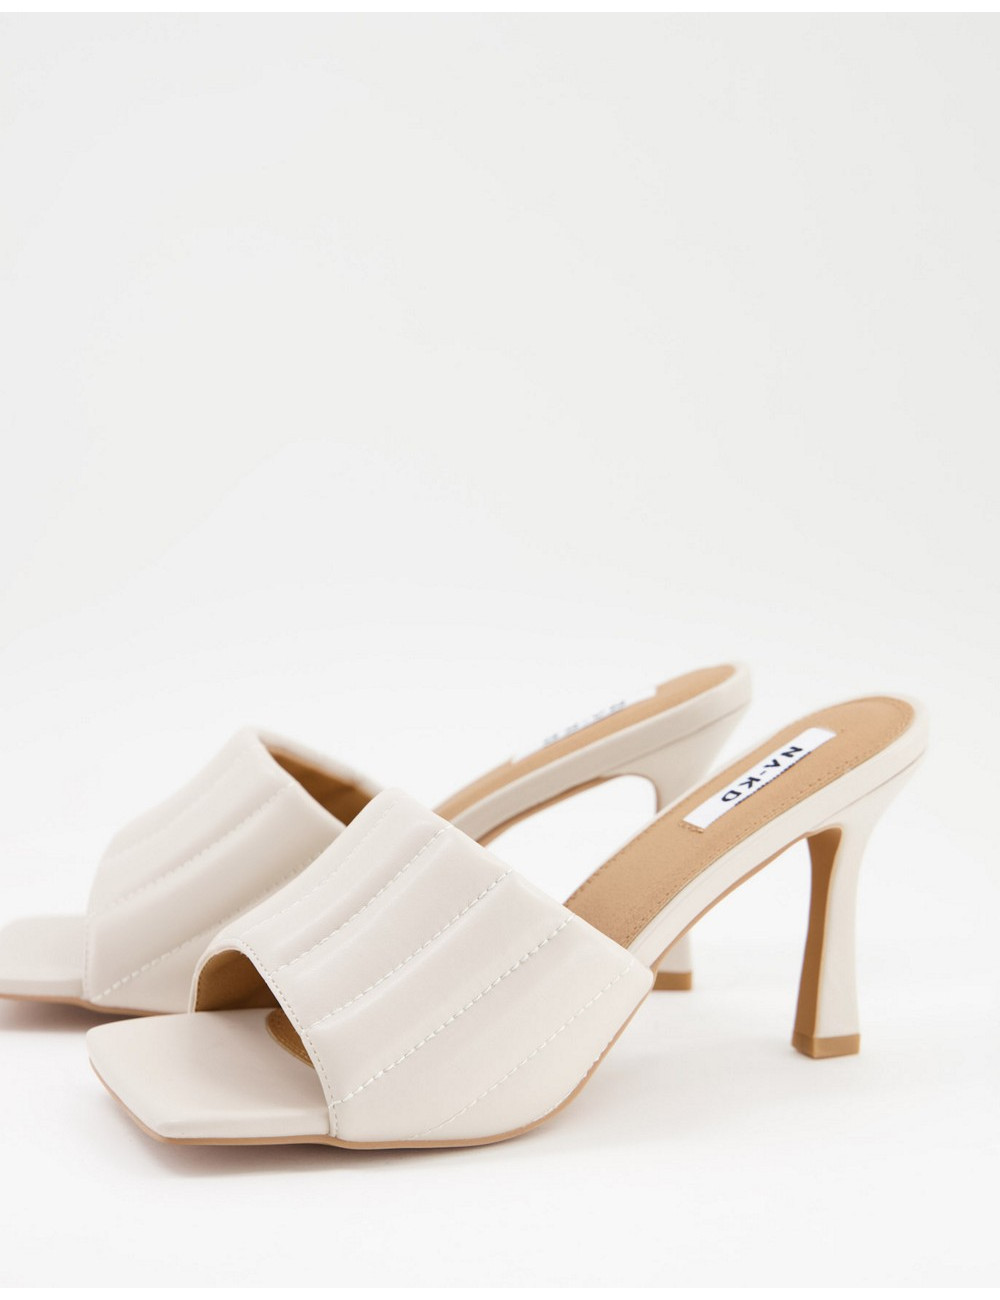 NA-KD quilted heels in cream